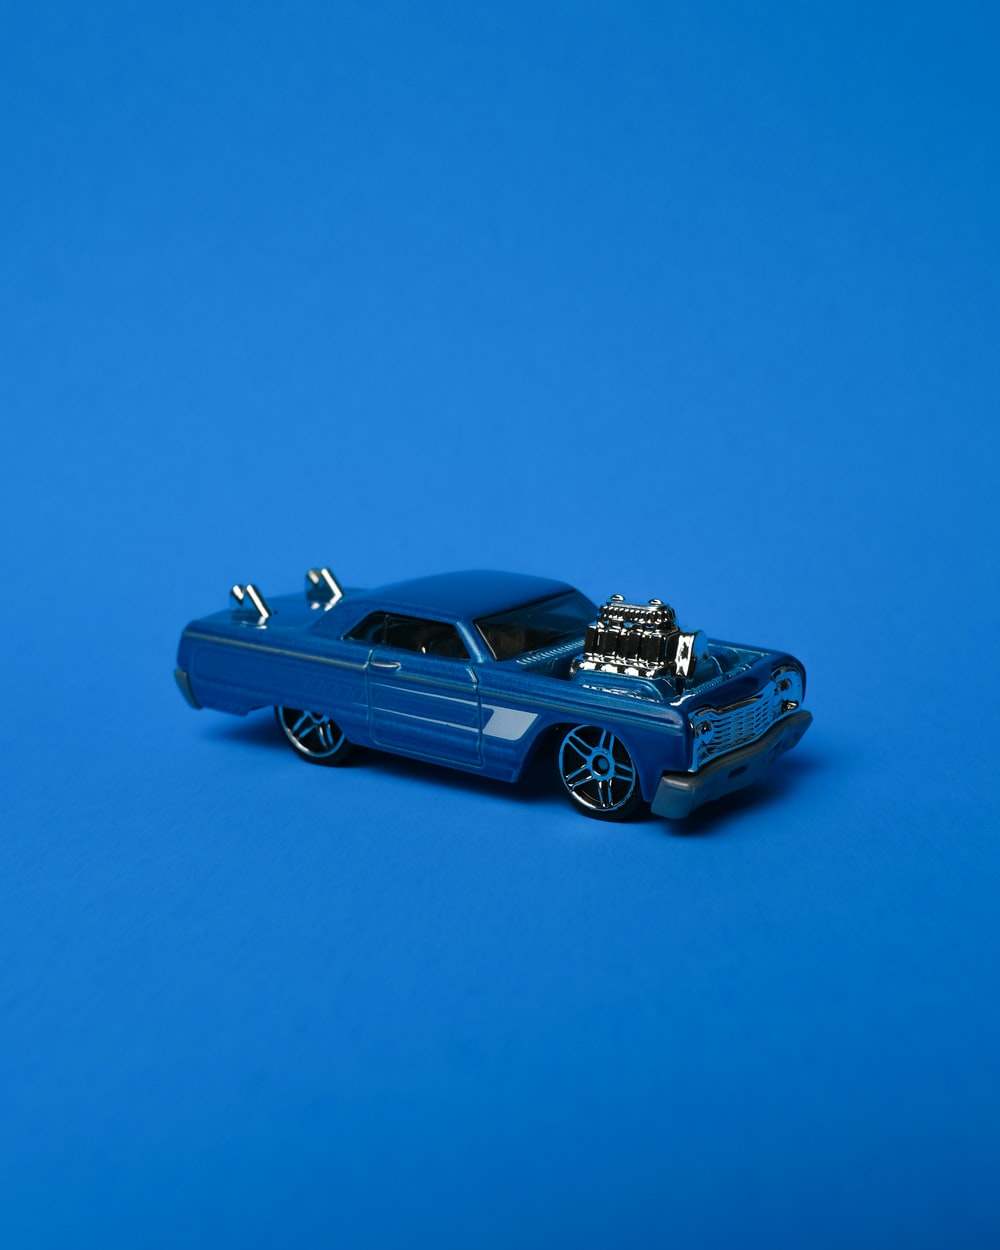 Hot Wheels Picture. Download Free Image